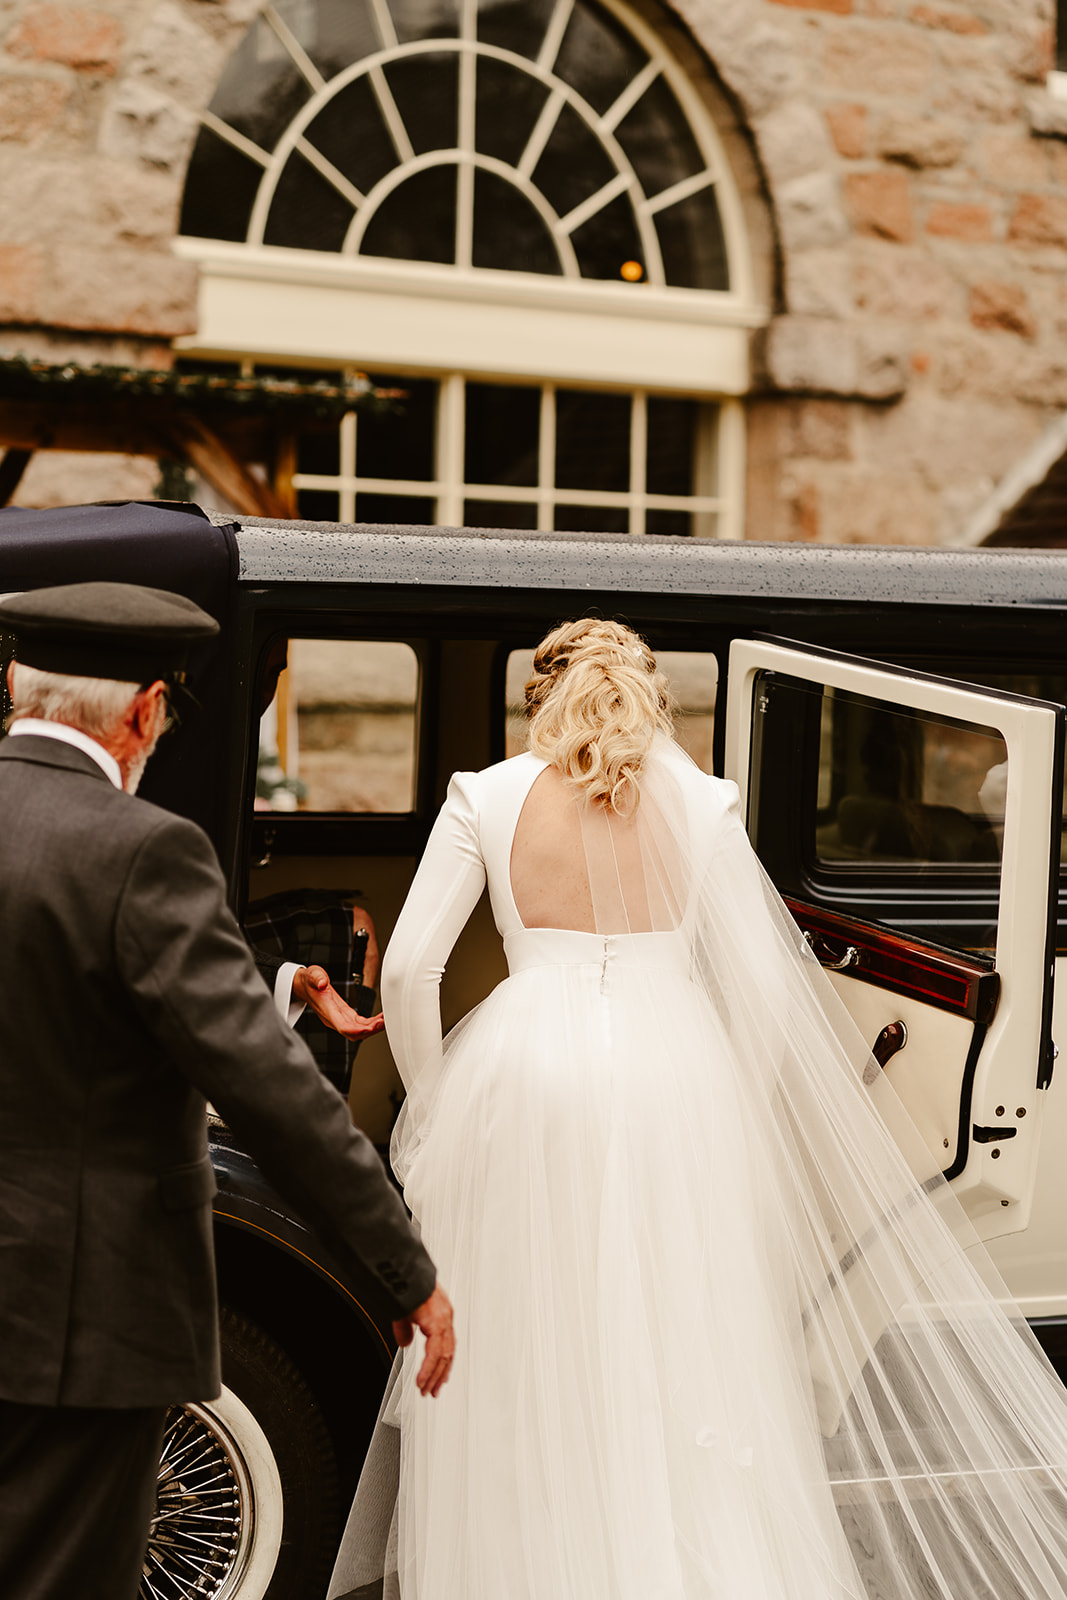 Image of a Bride and Groom standing outside a Vintage Car